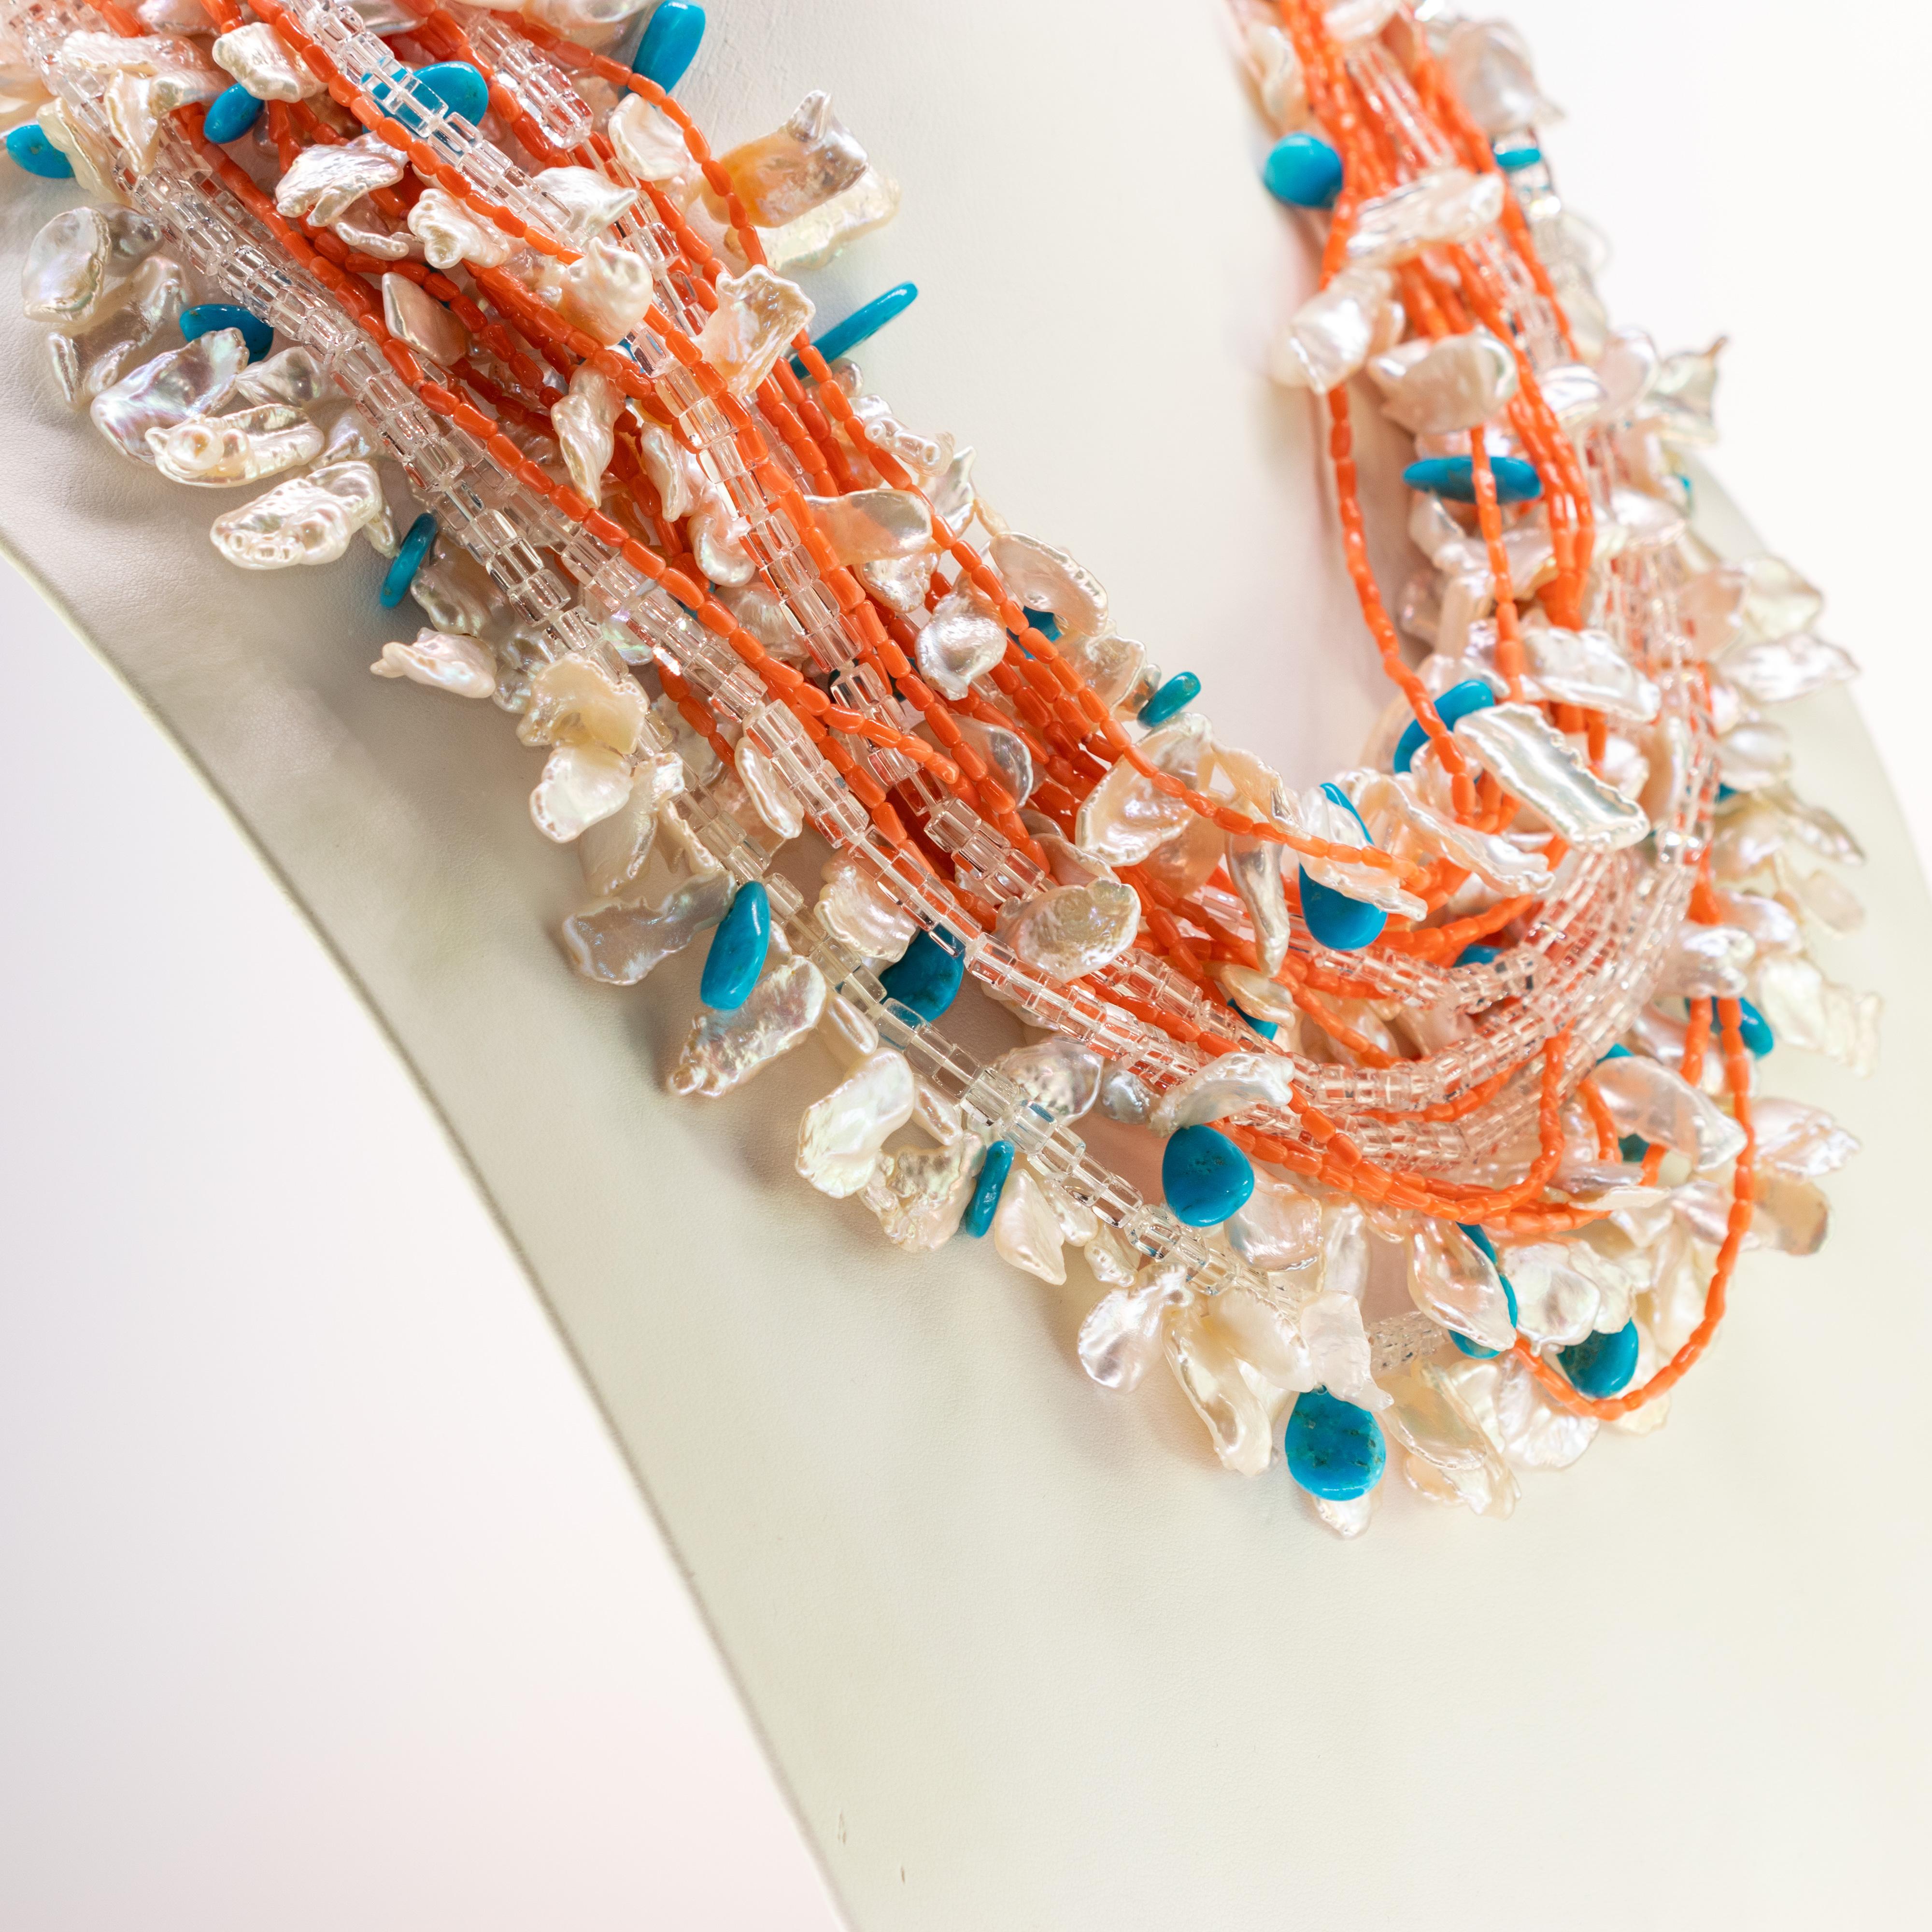 Stunning multi-strand necklace with rock crystal, pearls, coral and turquoise. This epic necklace is an outstanding display of color and Italian craftsmanship. 

This design is inspired by the magnificent Koi Fish, symbol of aspiration and wealth. A